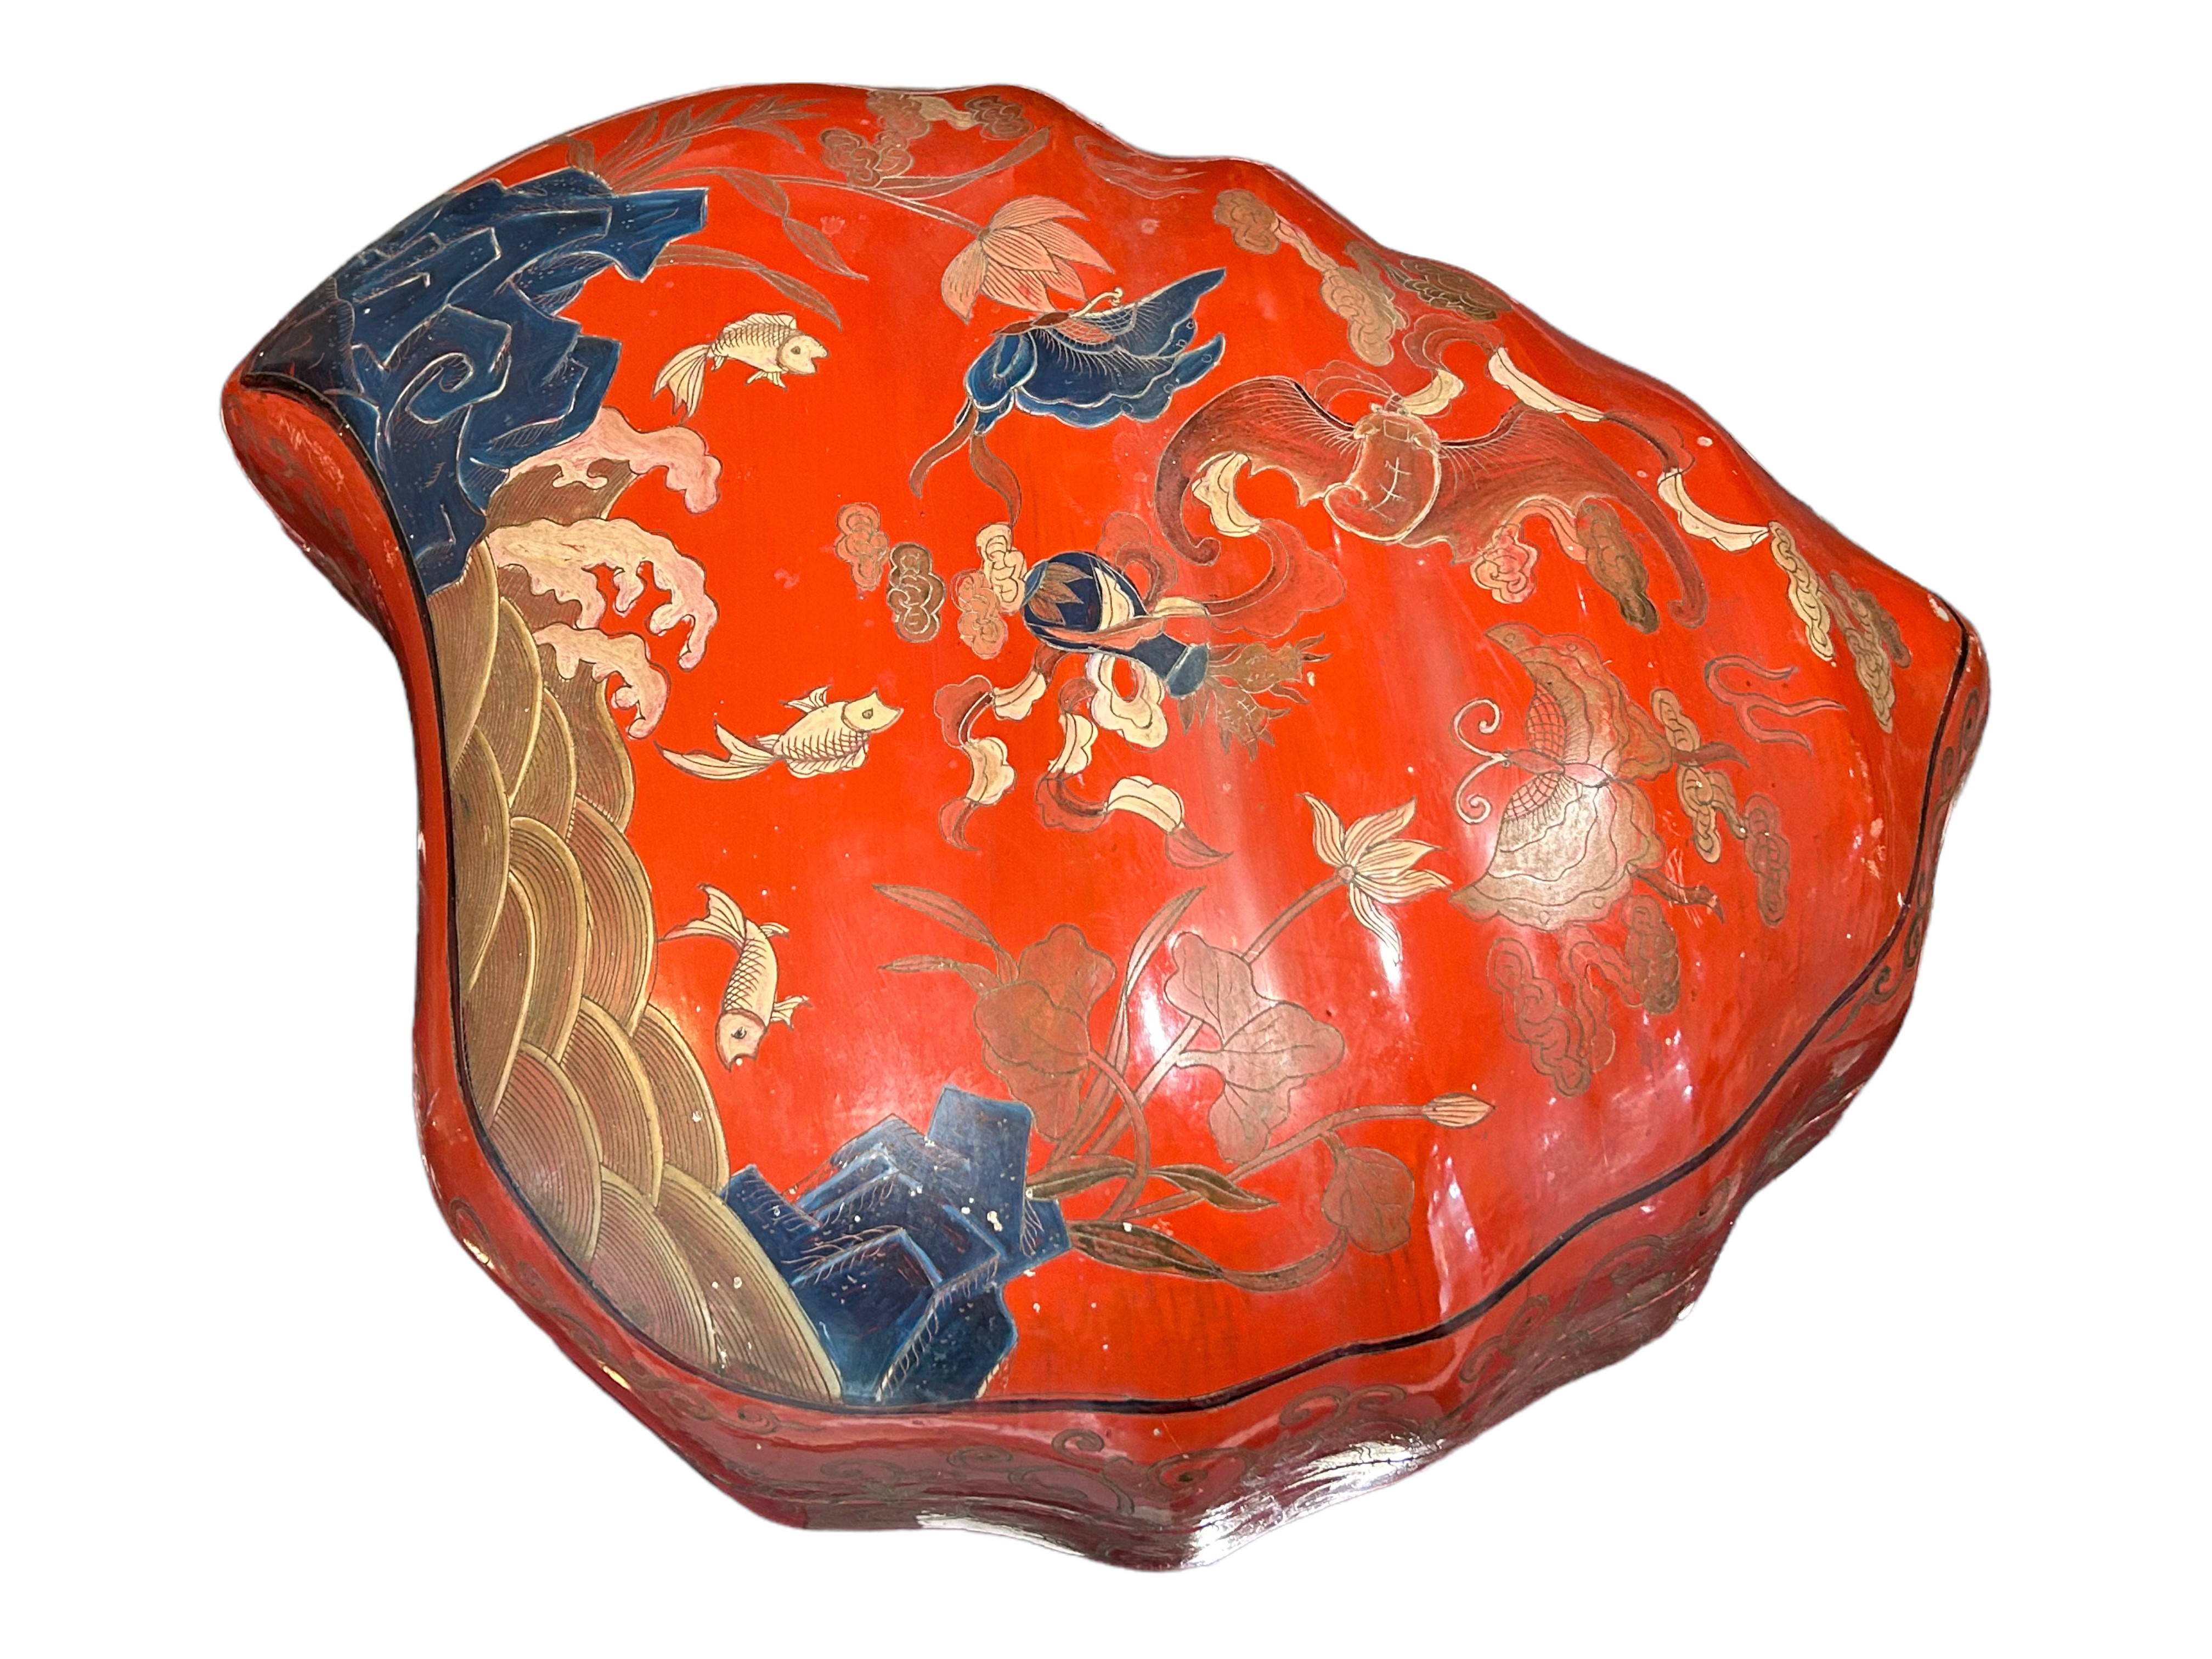 A LARGE LATE 19TH/EARLY 20TH CENTURY JAPANESE LACQUERED SHELL FORM BOX Hand painted with a rocky